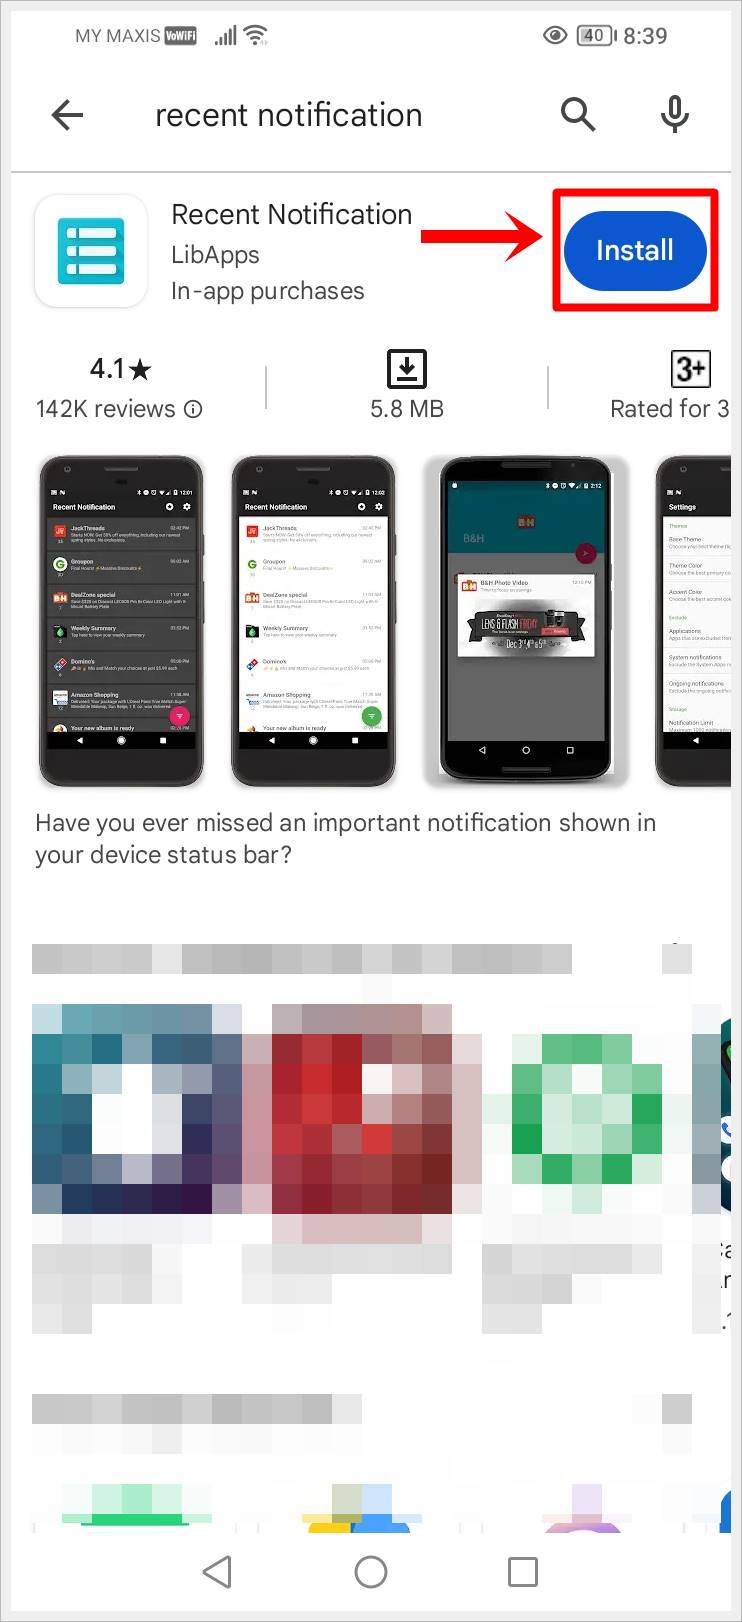 This image shows a screenshot of Google Play on an Android phone. The 'Install' button of the 'Recent Notification' app is highlighted.